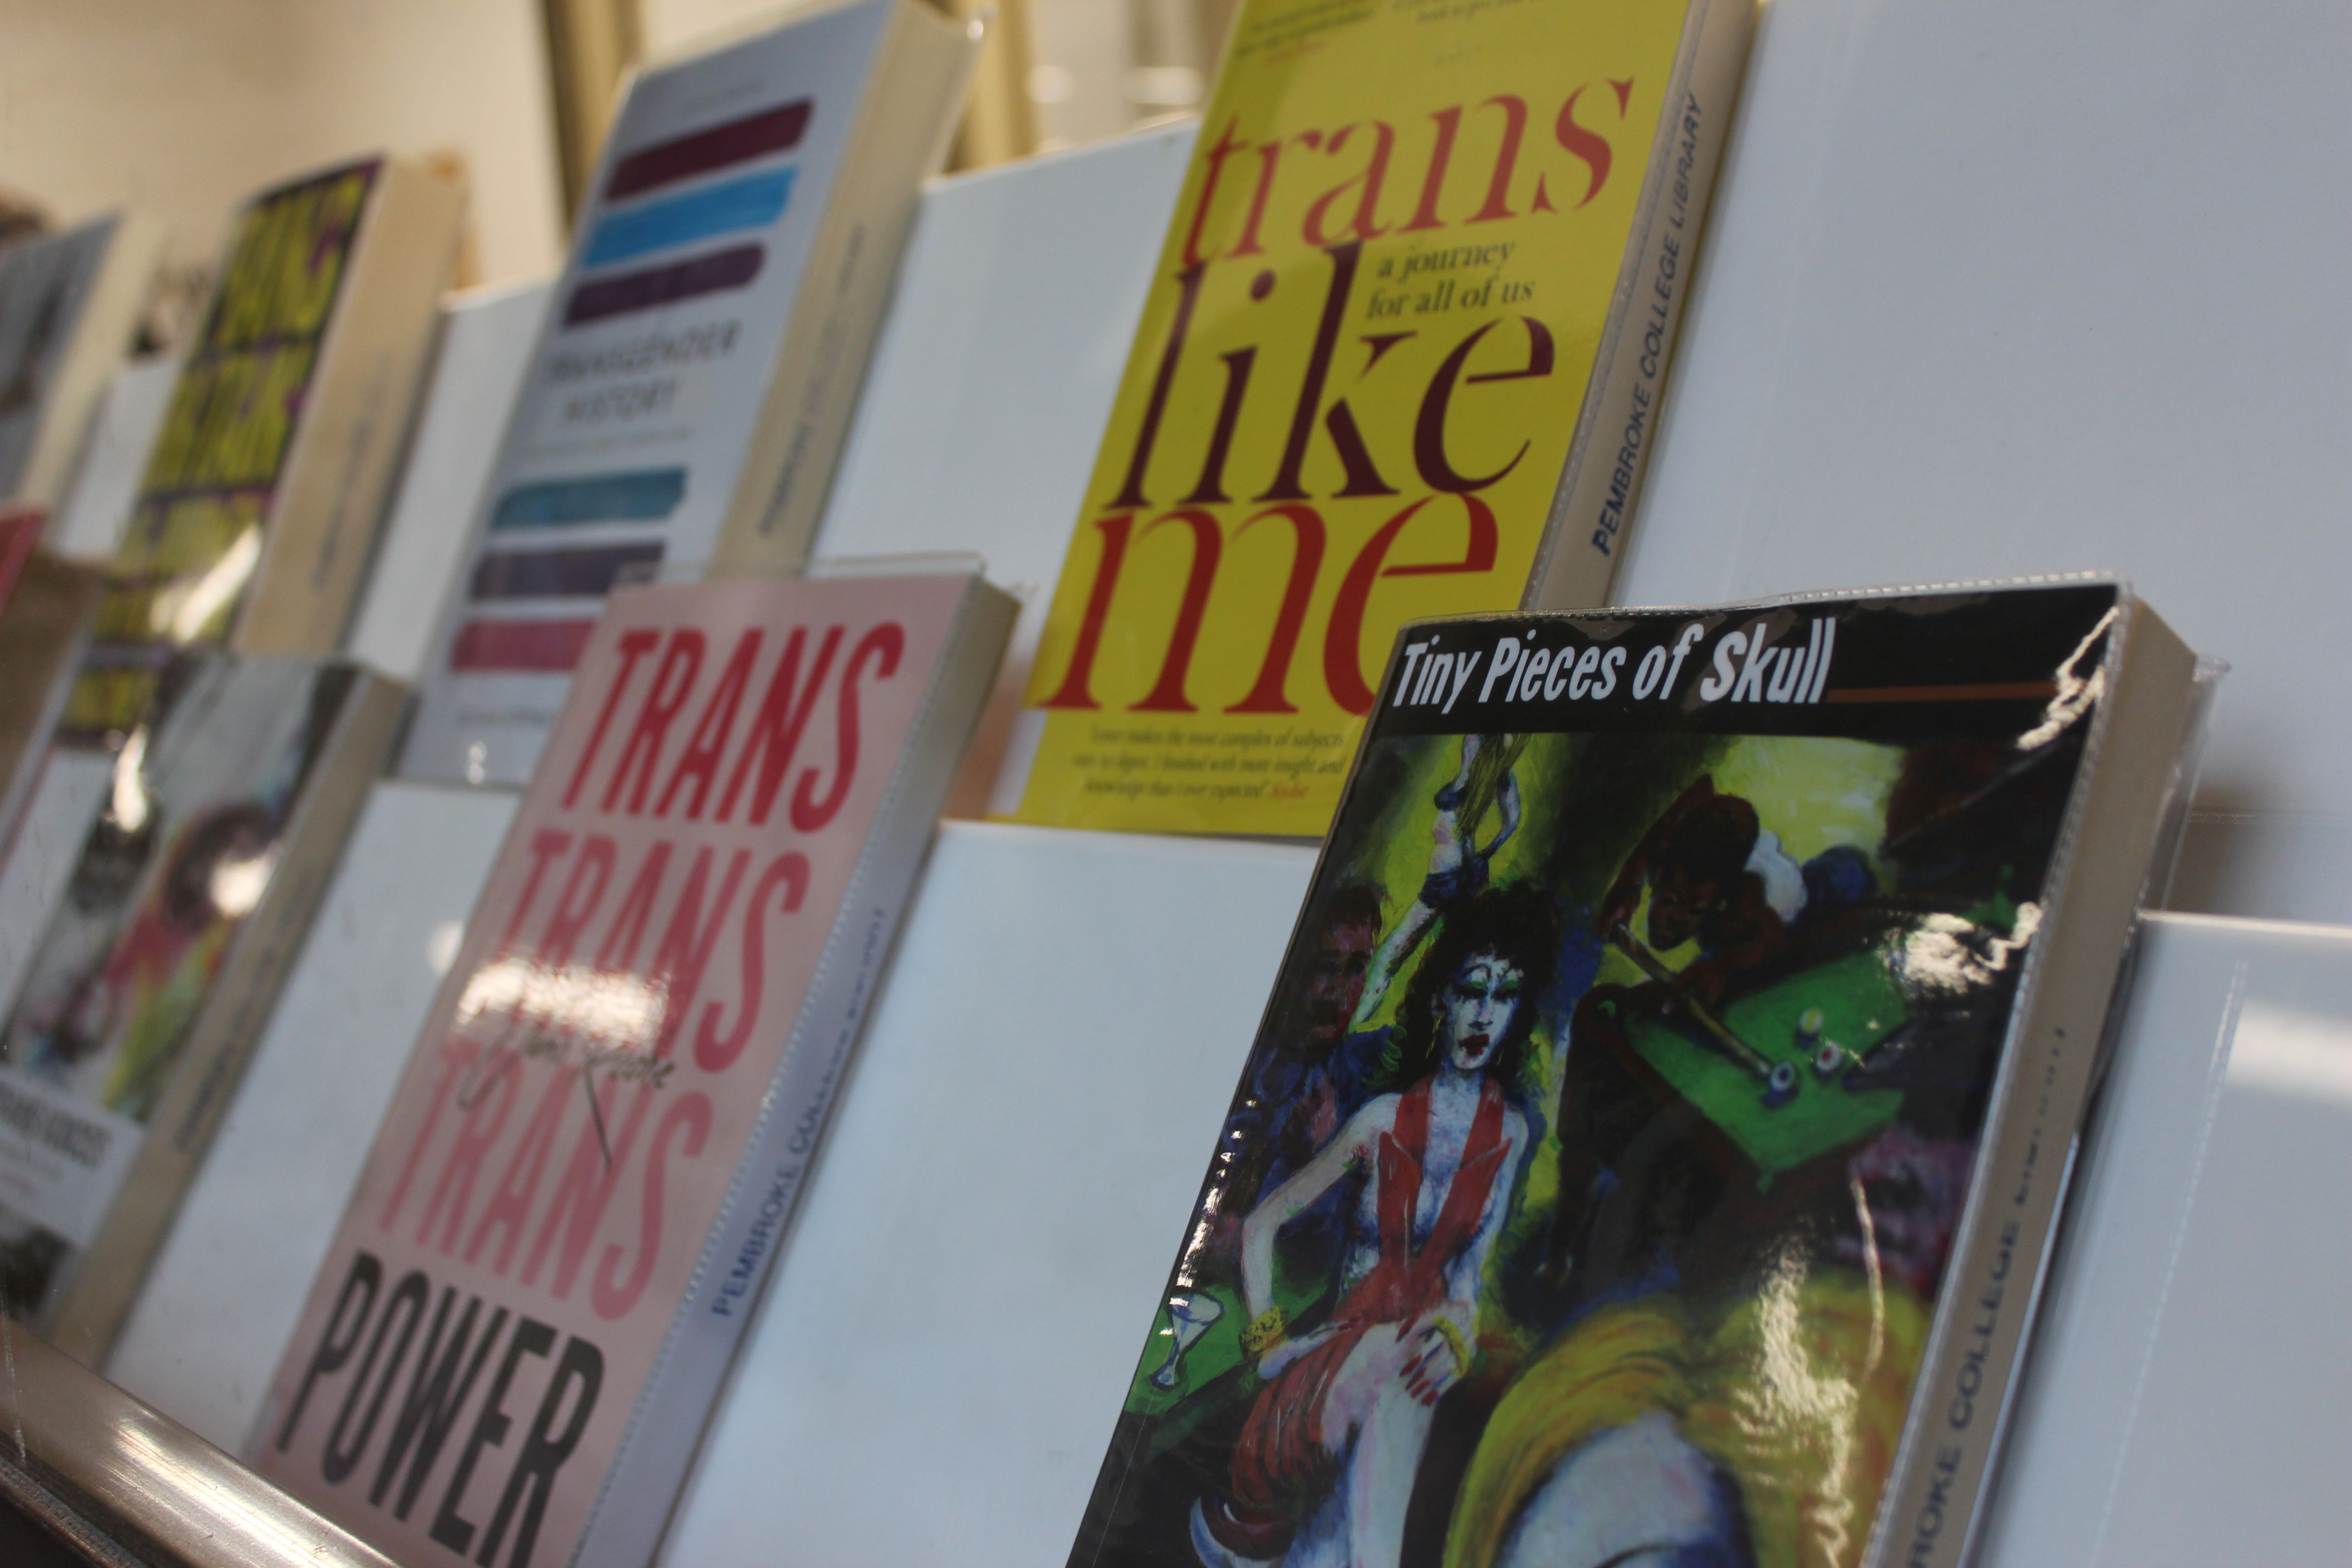 A close-up of the books on the Trans Day of Remembrance Book Display. The books with clear titles are: Tiny Pieces of Skull by Roz Kaveney, Trans Like Me by C N Lester and Trans Power by Juno Roche.